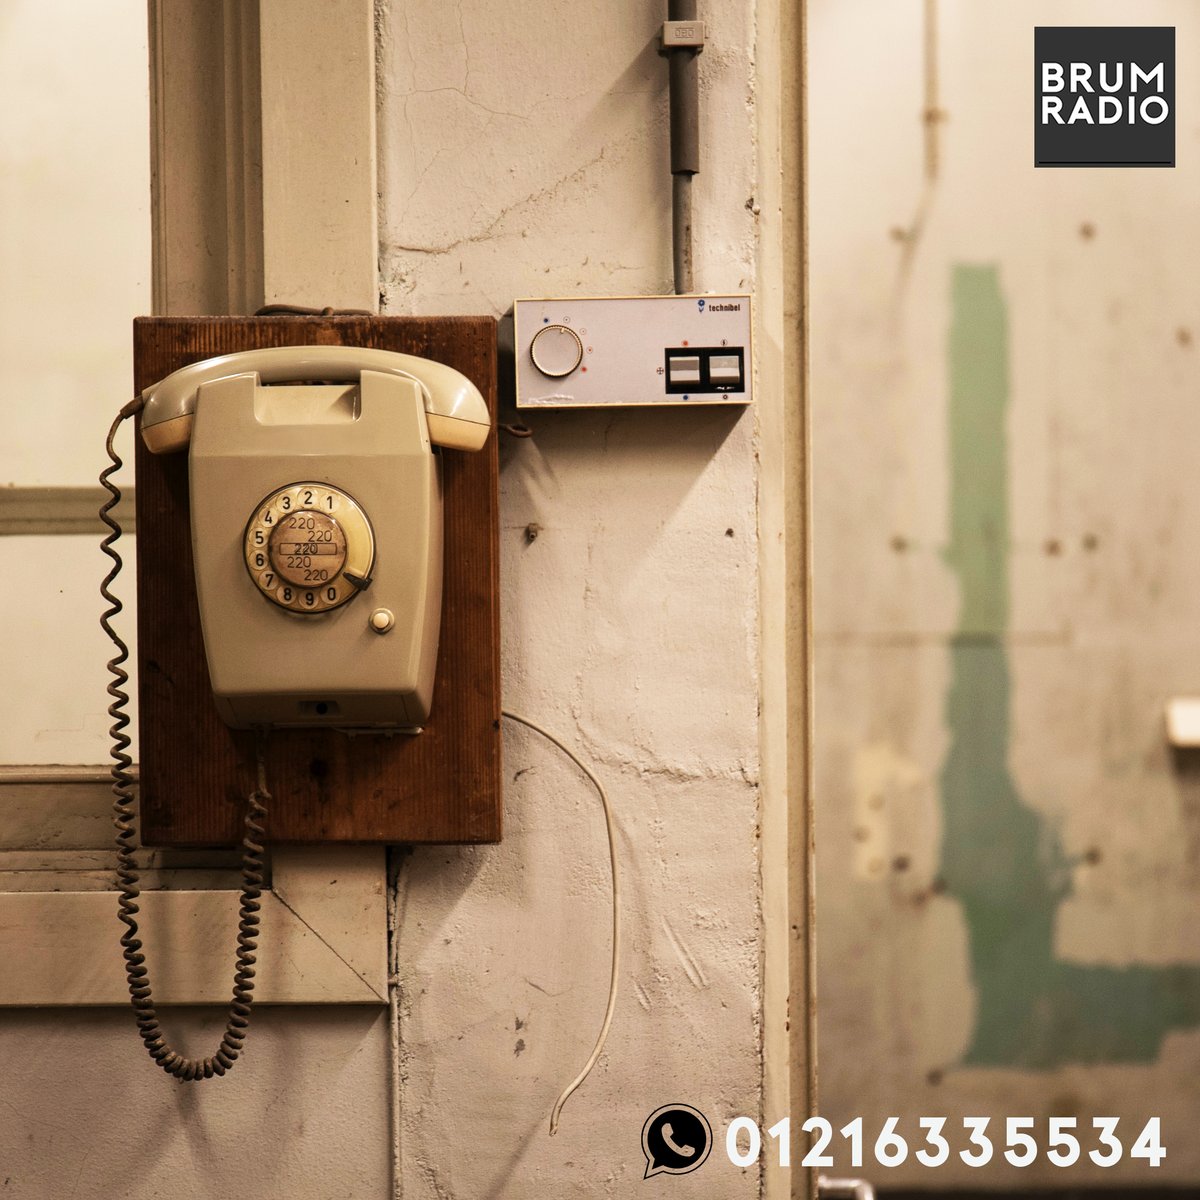 Want to contact the Brum Radio studio directly?

Contact us via Whatsapp on +441216335534
We may even read your message out on the air.
#InBrumWeTrust #Birmingham